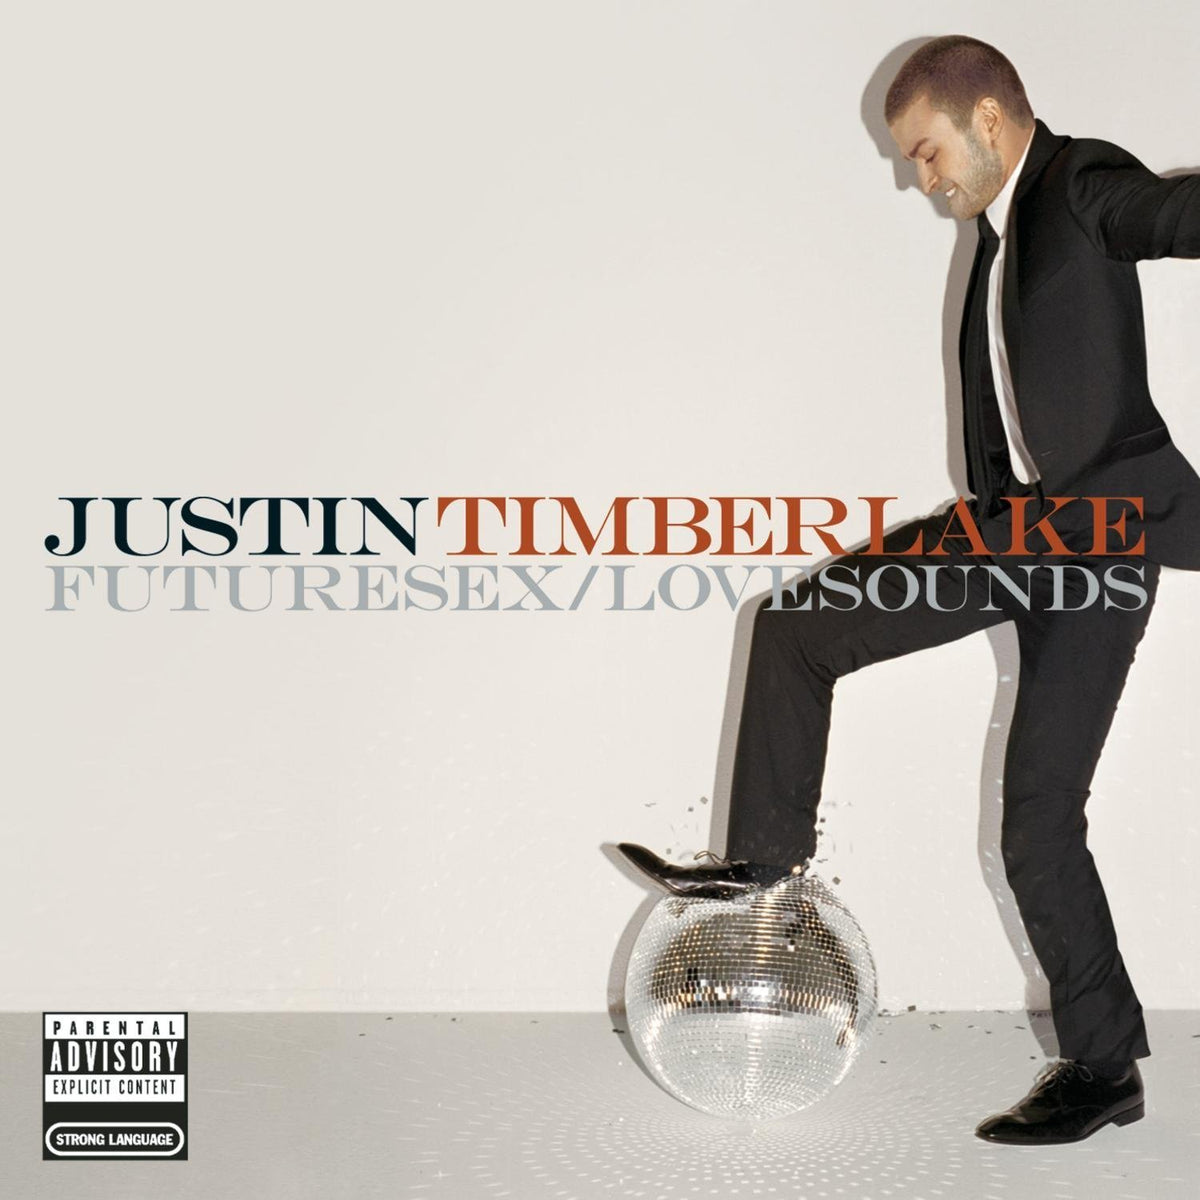 FutureSex/LoveSounds: The Last Pop Album We All Agreed On